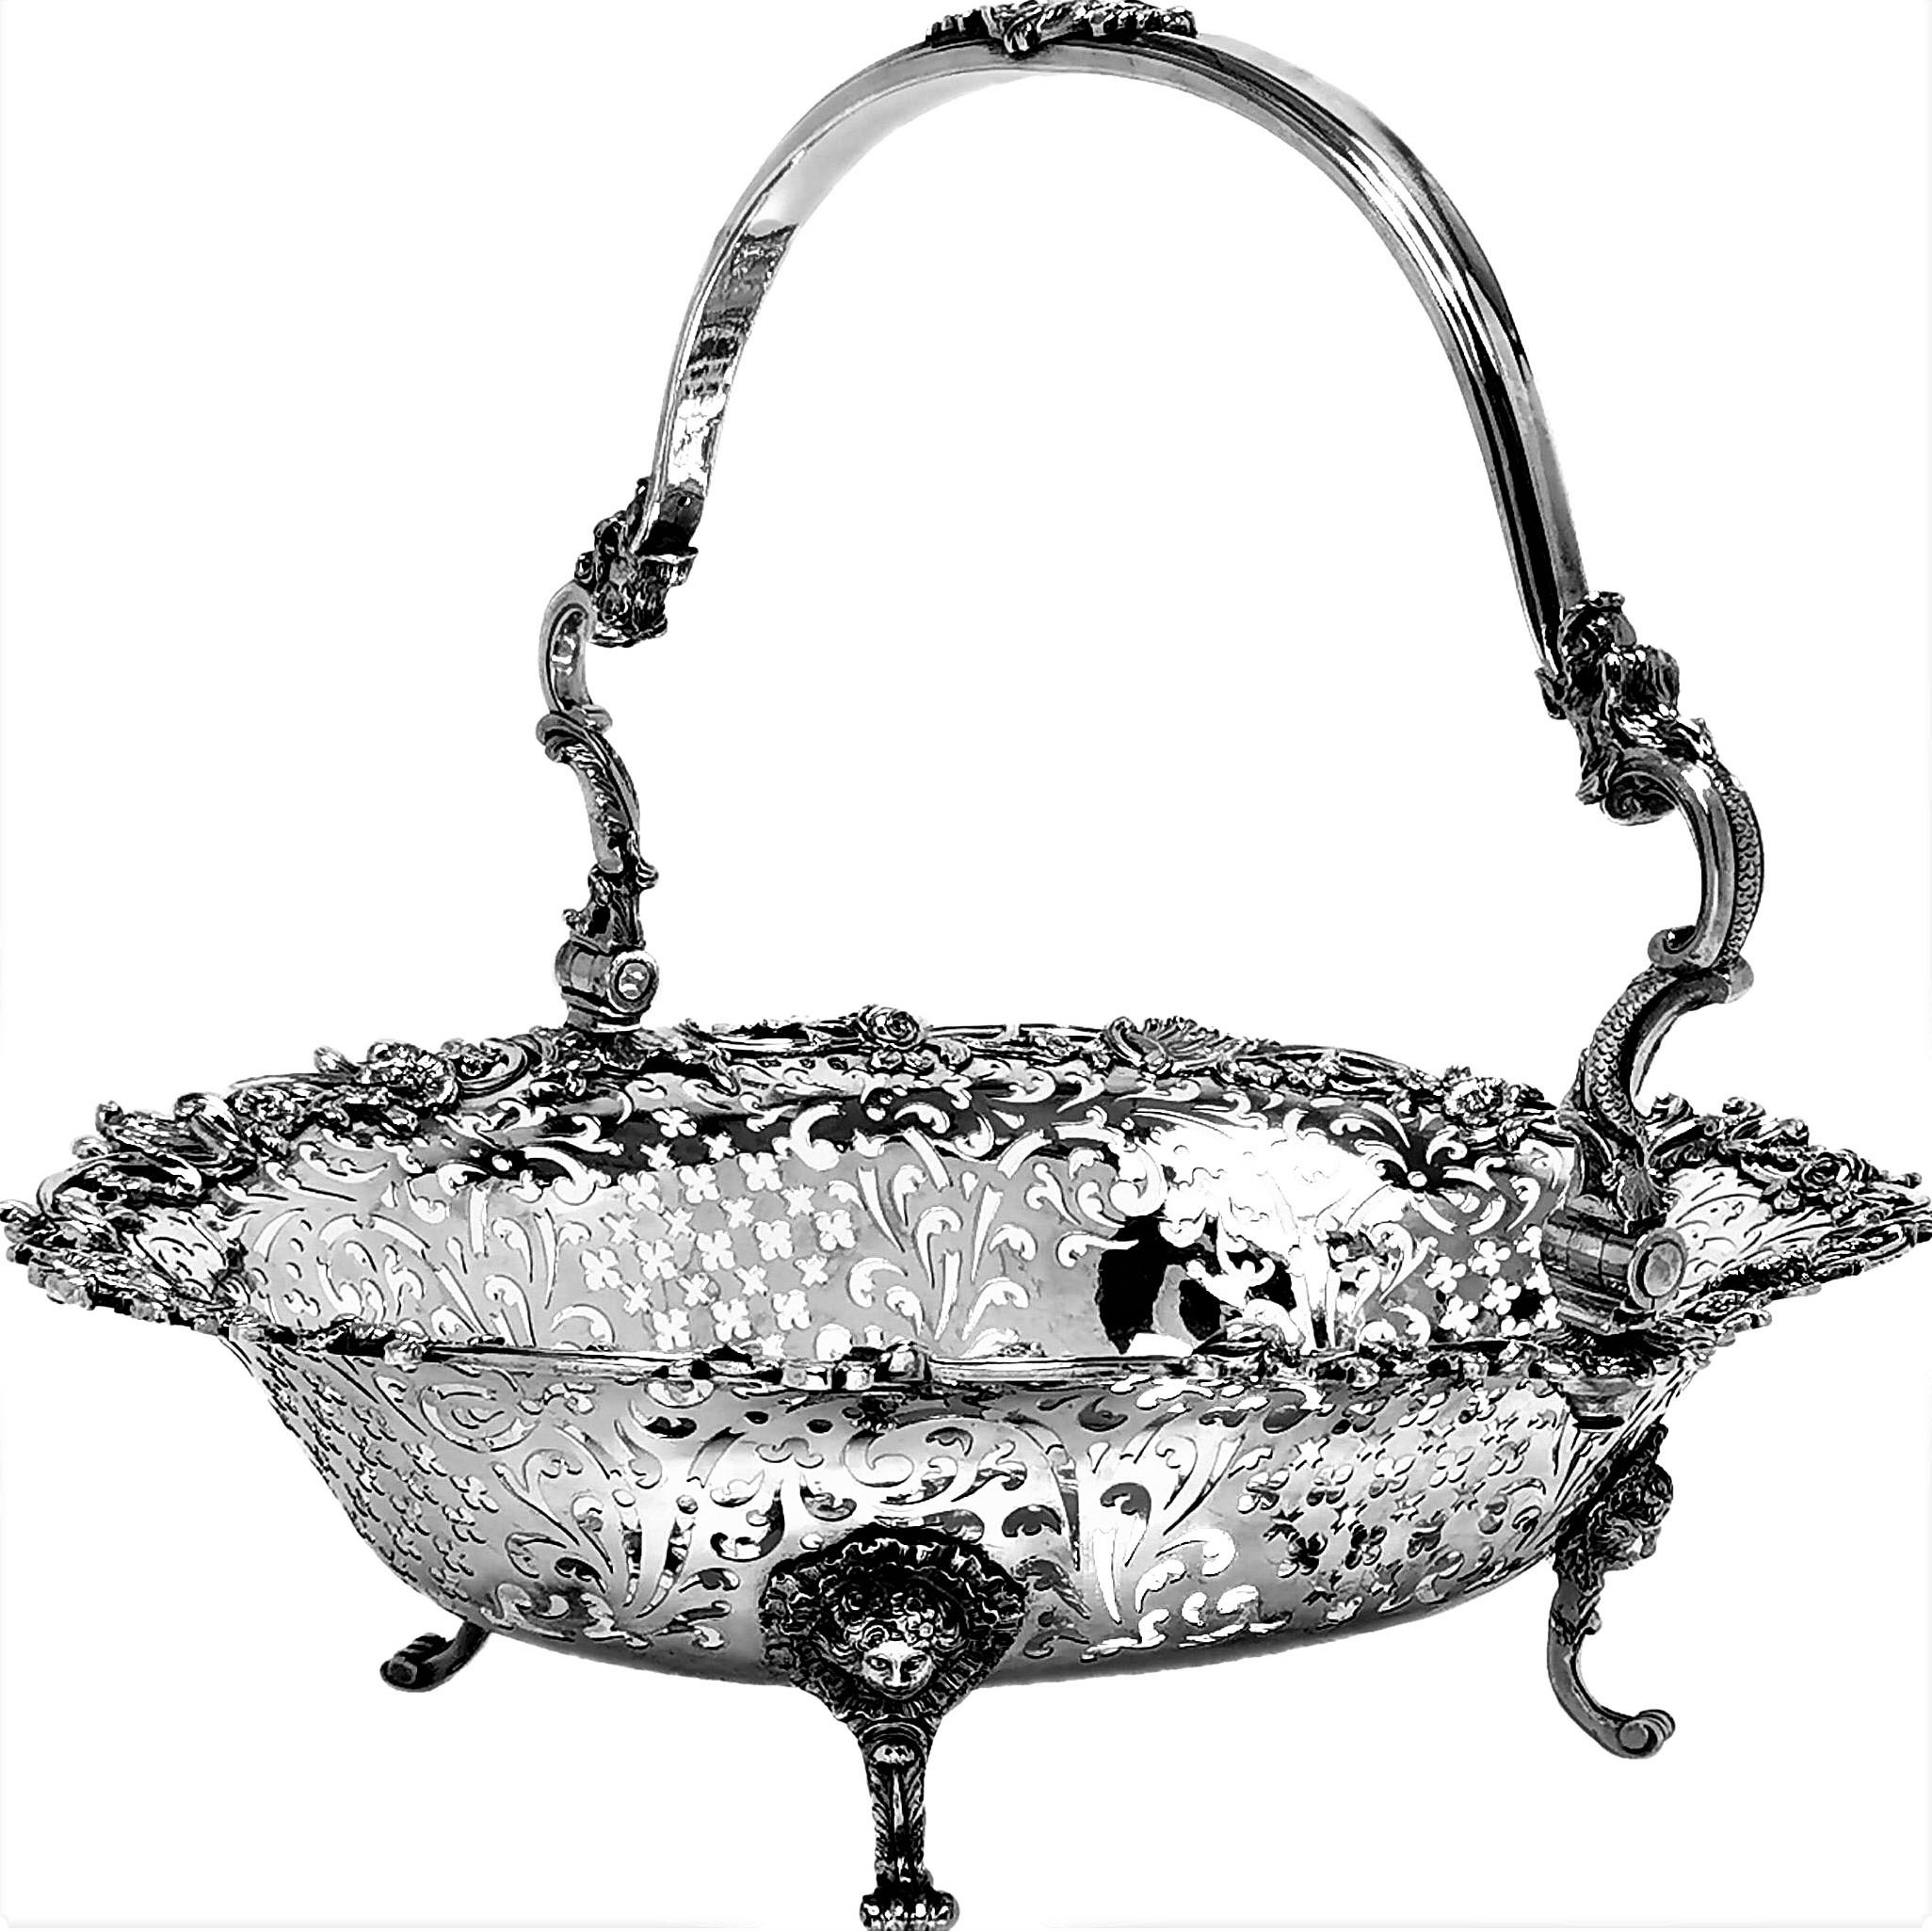 18th Century and Earlier Antique George III Sterling Silver Basket 1771 Cake Fruit Bread Swing Handled